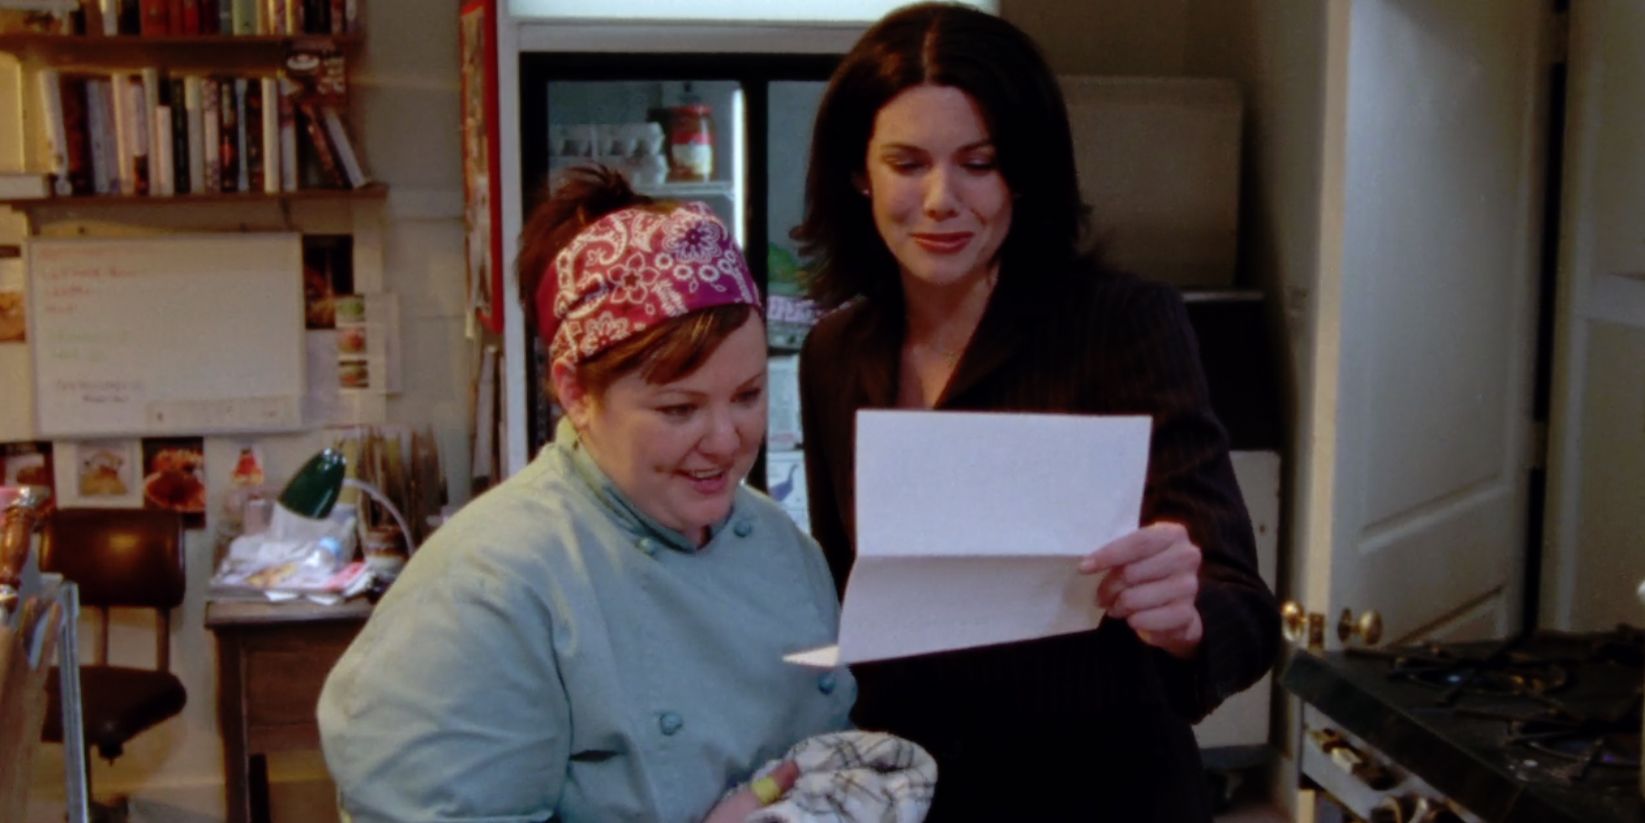 20 Gilmore Girls Quotes We All Still Relate To